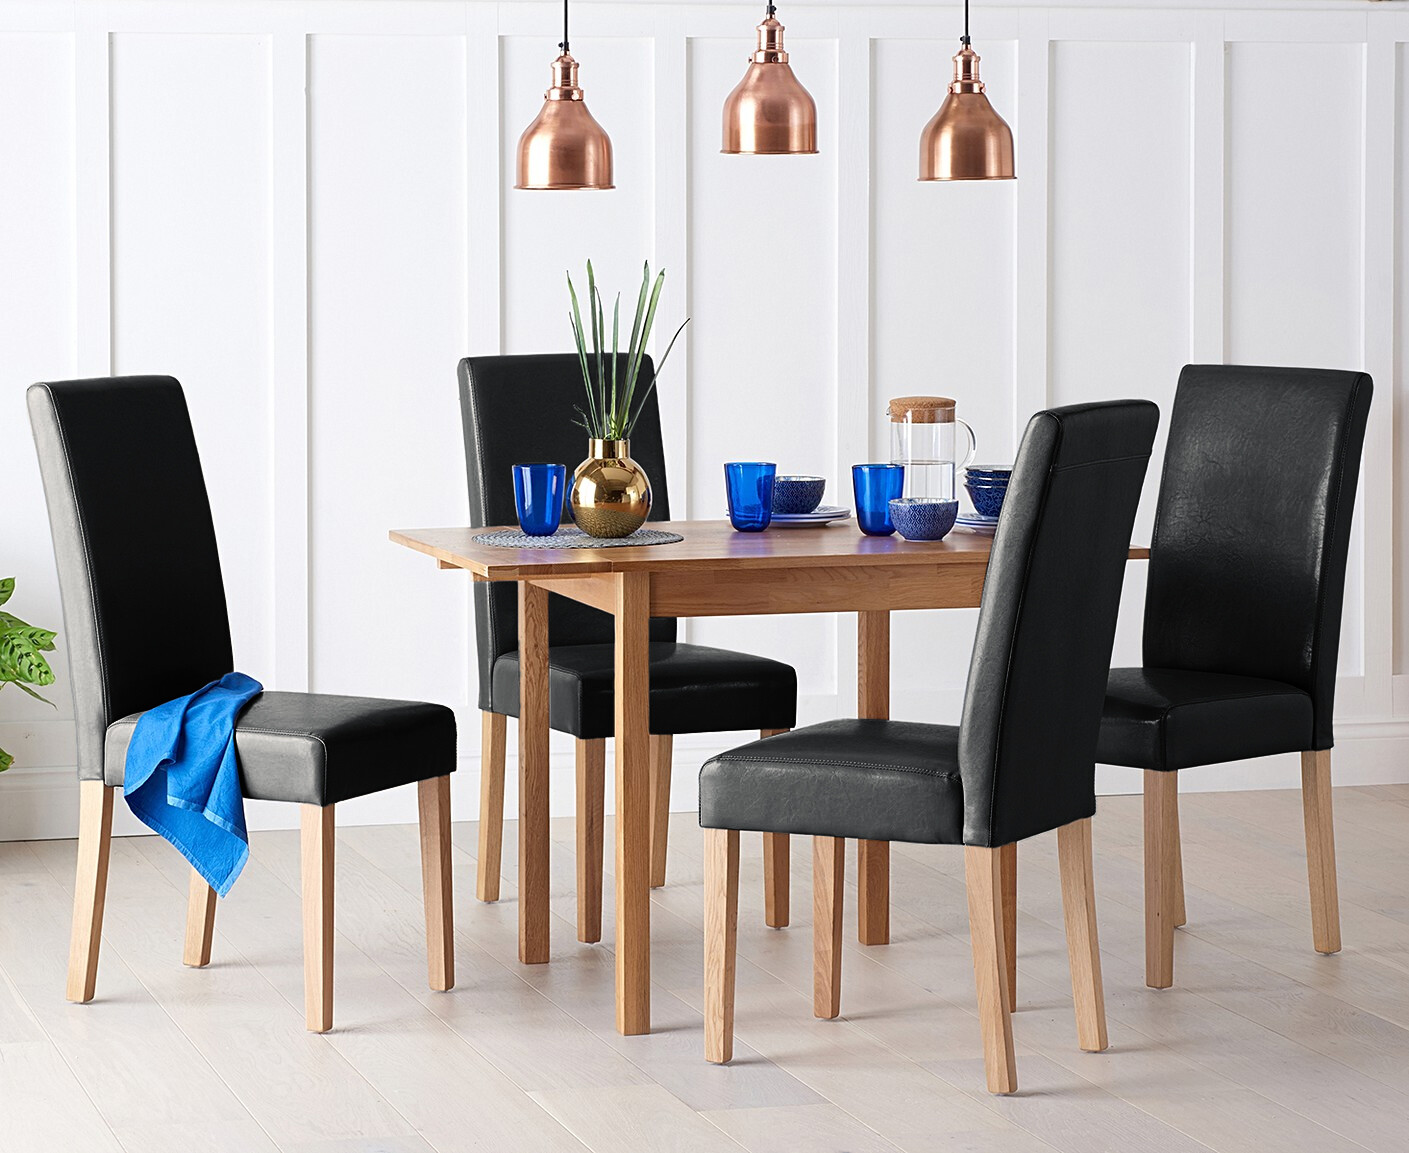 Extending York 70cm Solid Oak Dining Table With 4 Black Olivia Chairs